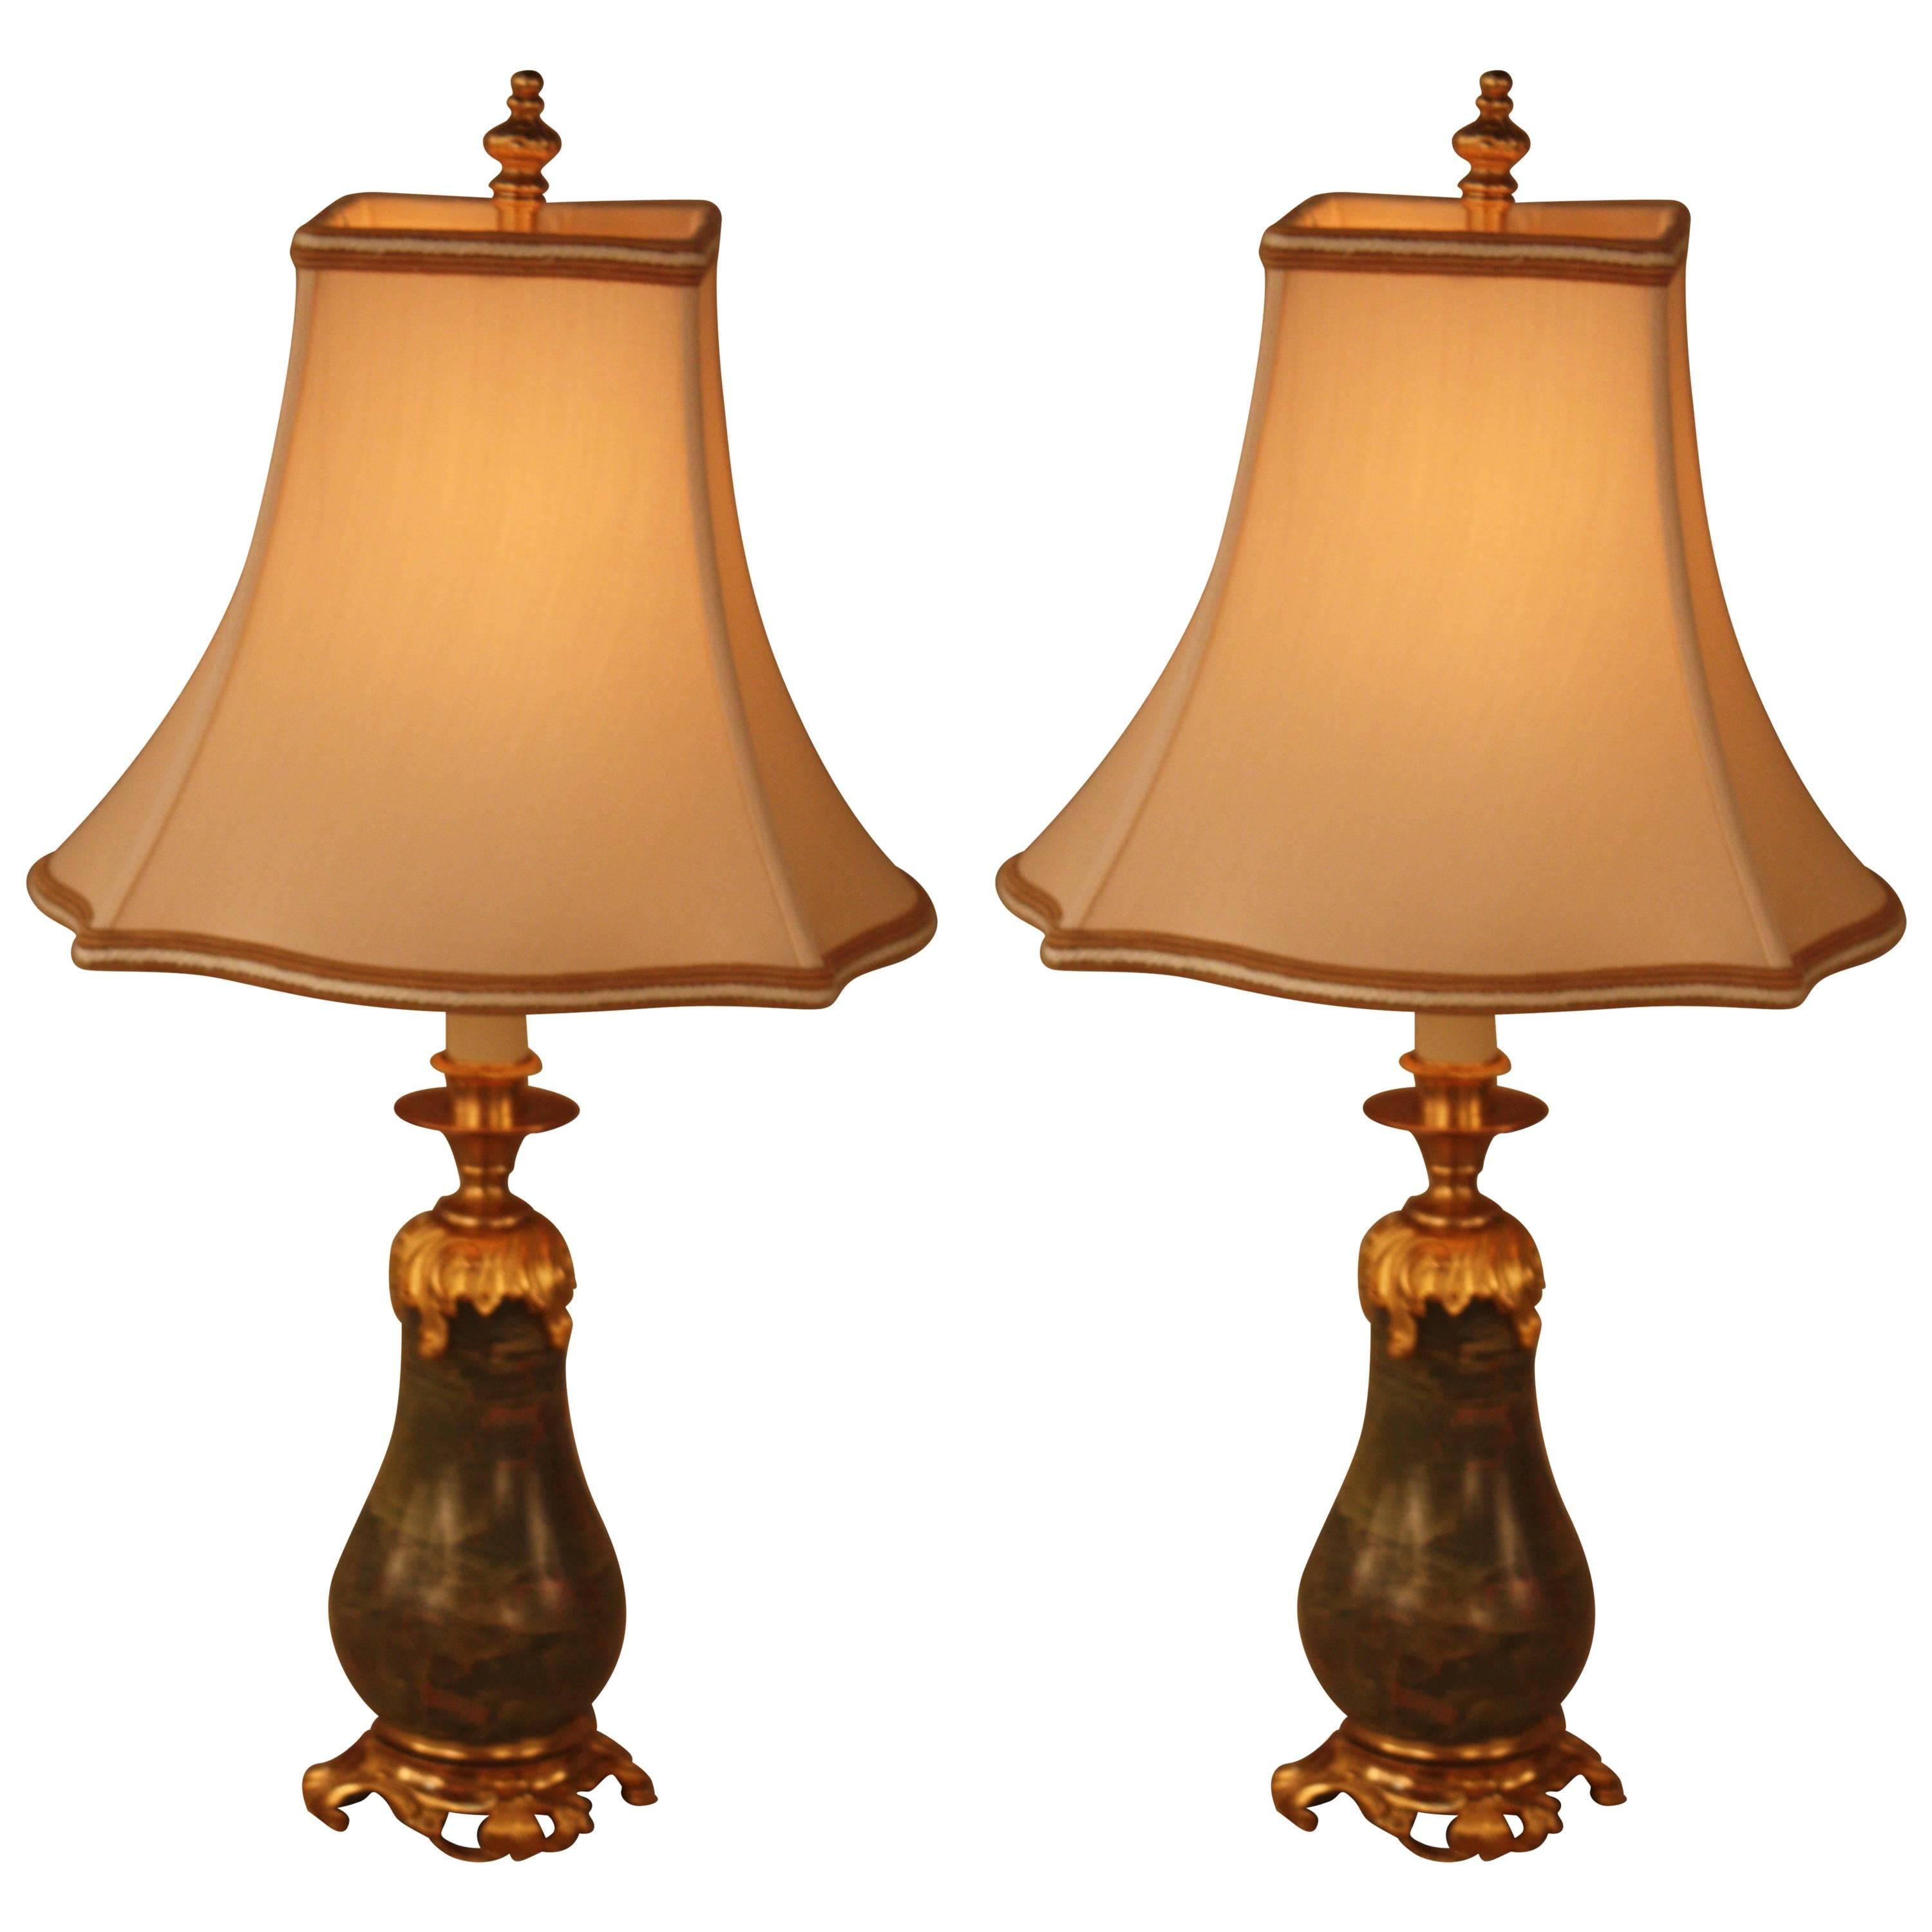 Pair of French Onyx and Doré Bronze Table Lamps